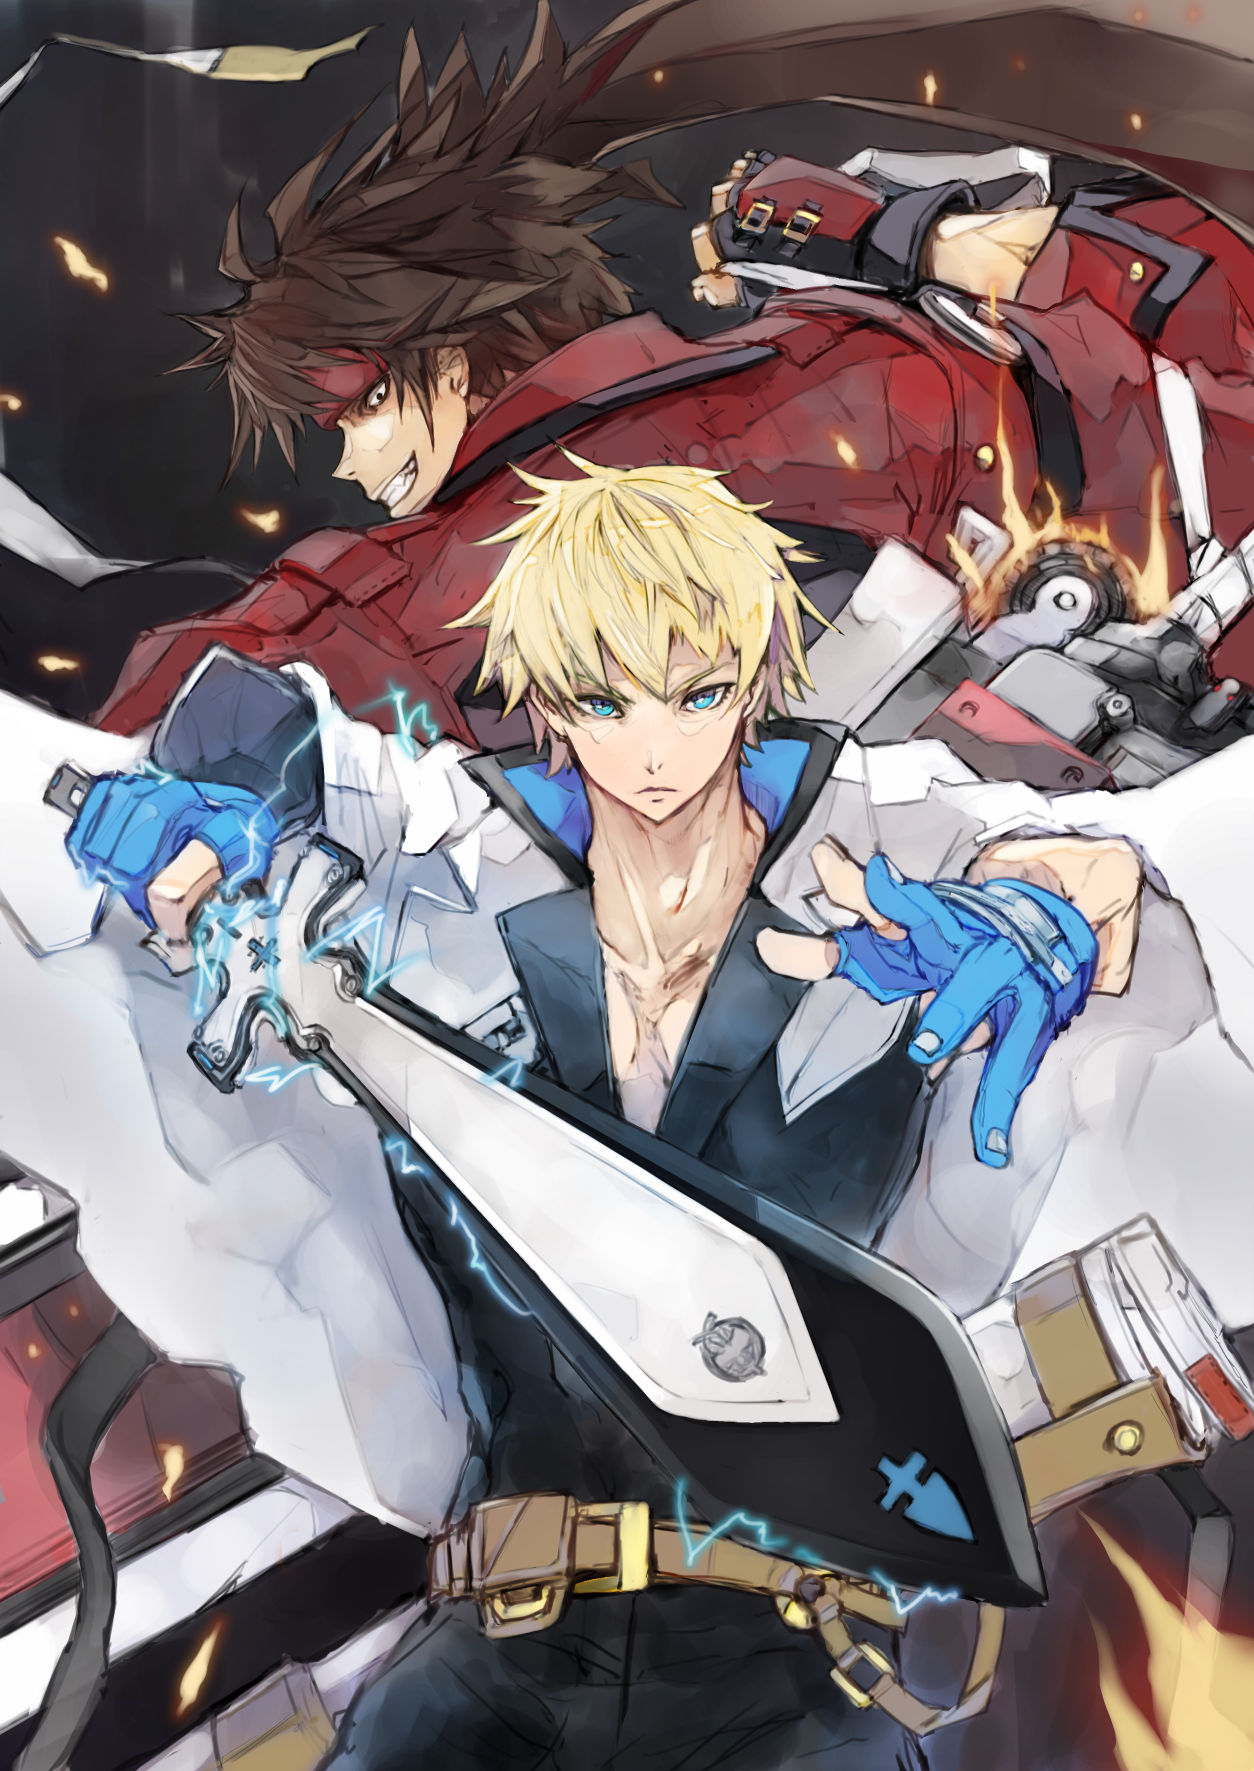 back-to-back bana_(stand_flower) blonde_hair blue_eyes brown_hair fingerless_gloves fire gloves guilty_gear guilty_gear_strive headband highres jacket ky_kiske lightning muscle ponytail rivalry short_hair simple_background sol_badguy sword weapon